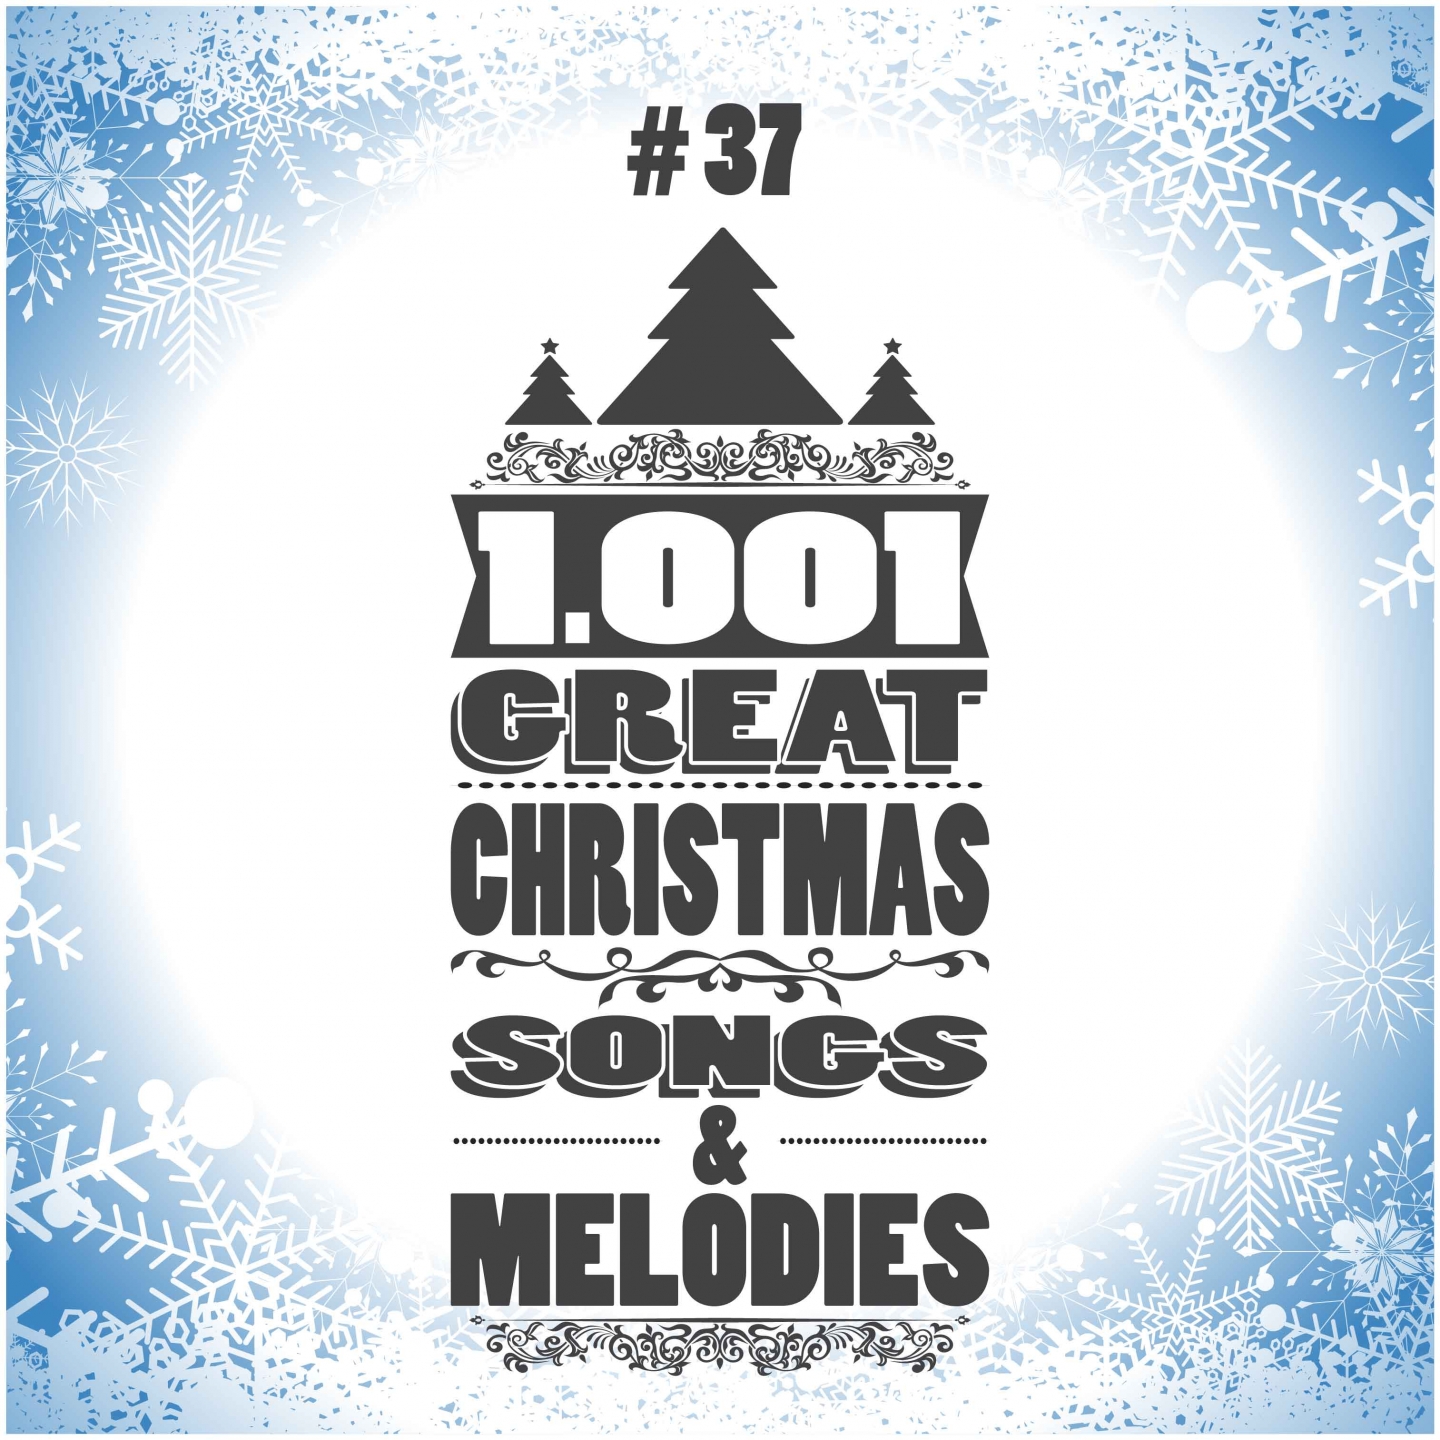 1001 Great Christmas Songs & Melodies, Vol. 37